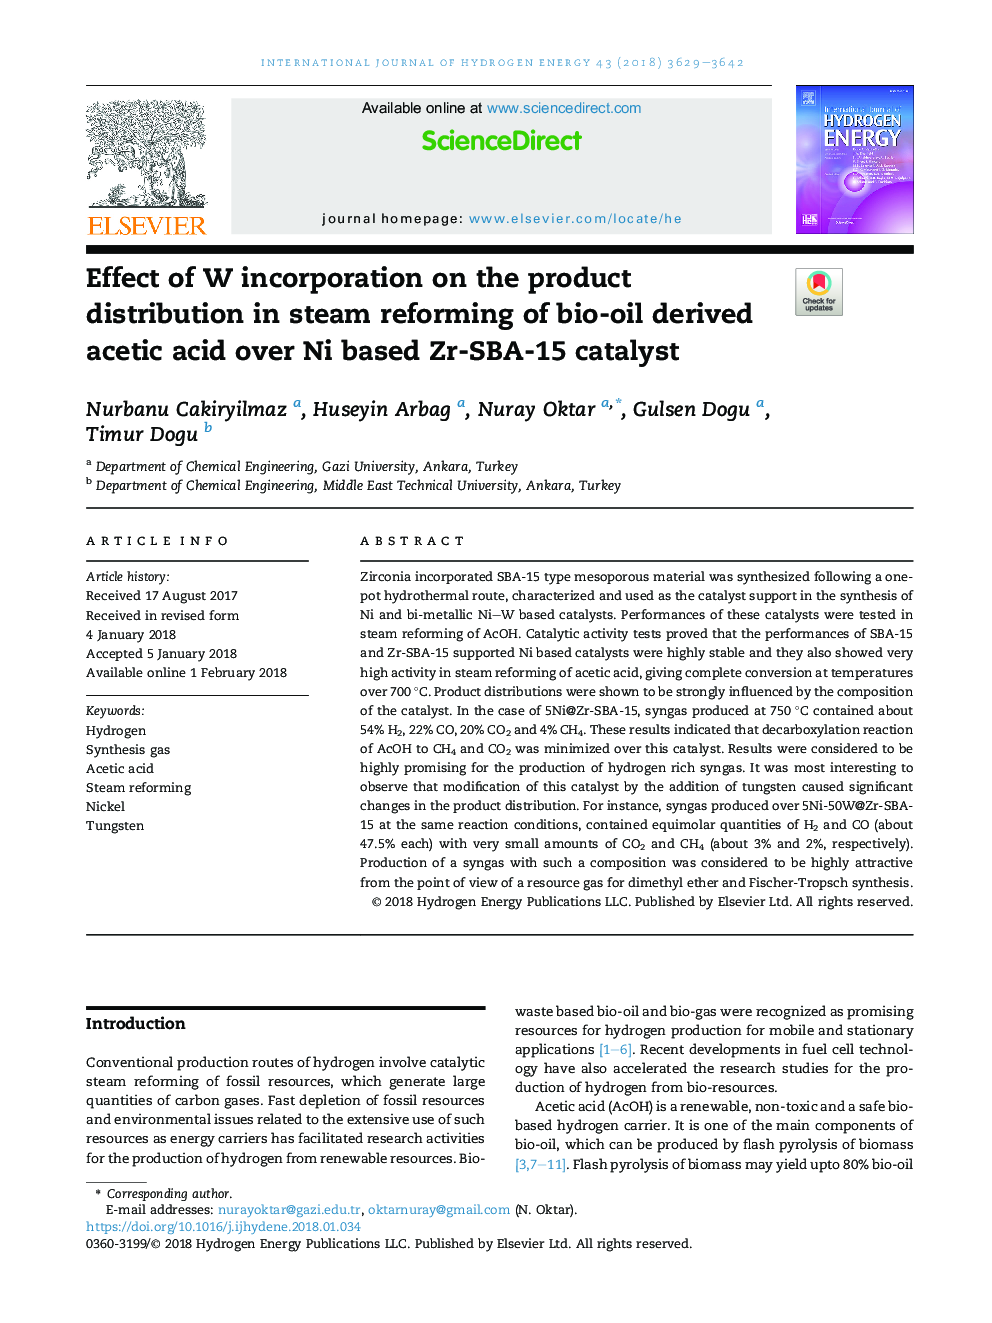 Effect of W incorporation on the product distribution in steam reforming of bio-oil derived acetic acid over Ni based Zr-SBA-15 catalyst